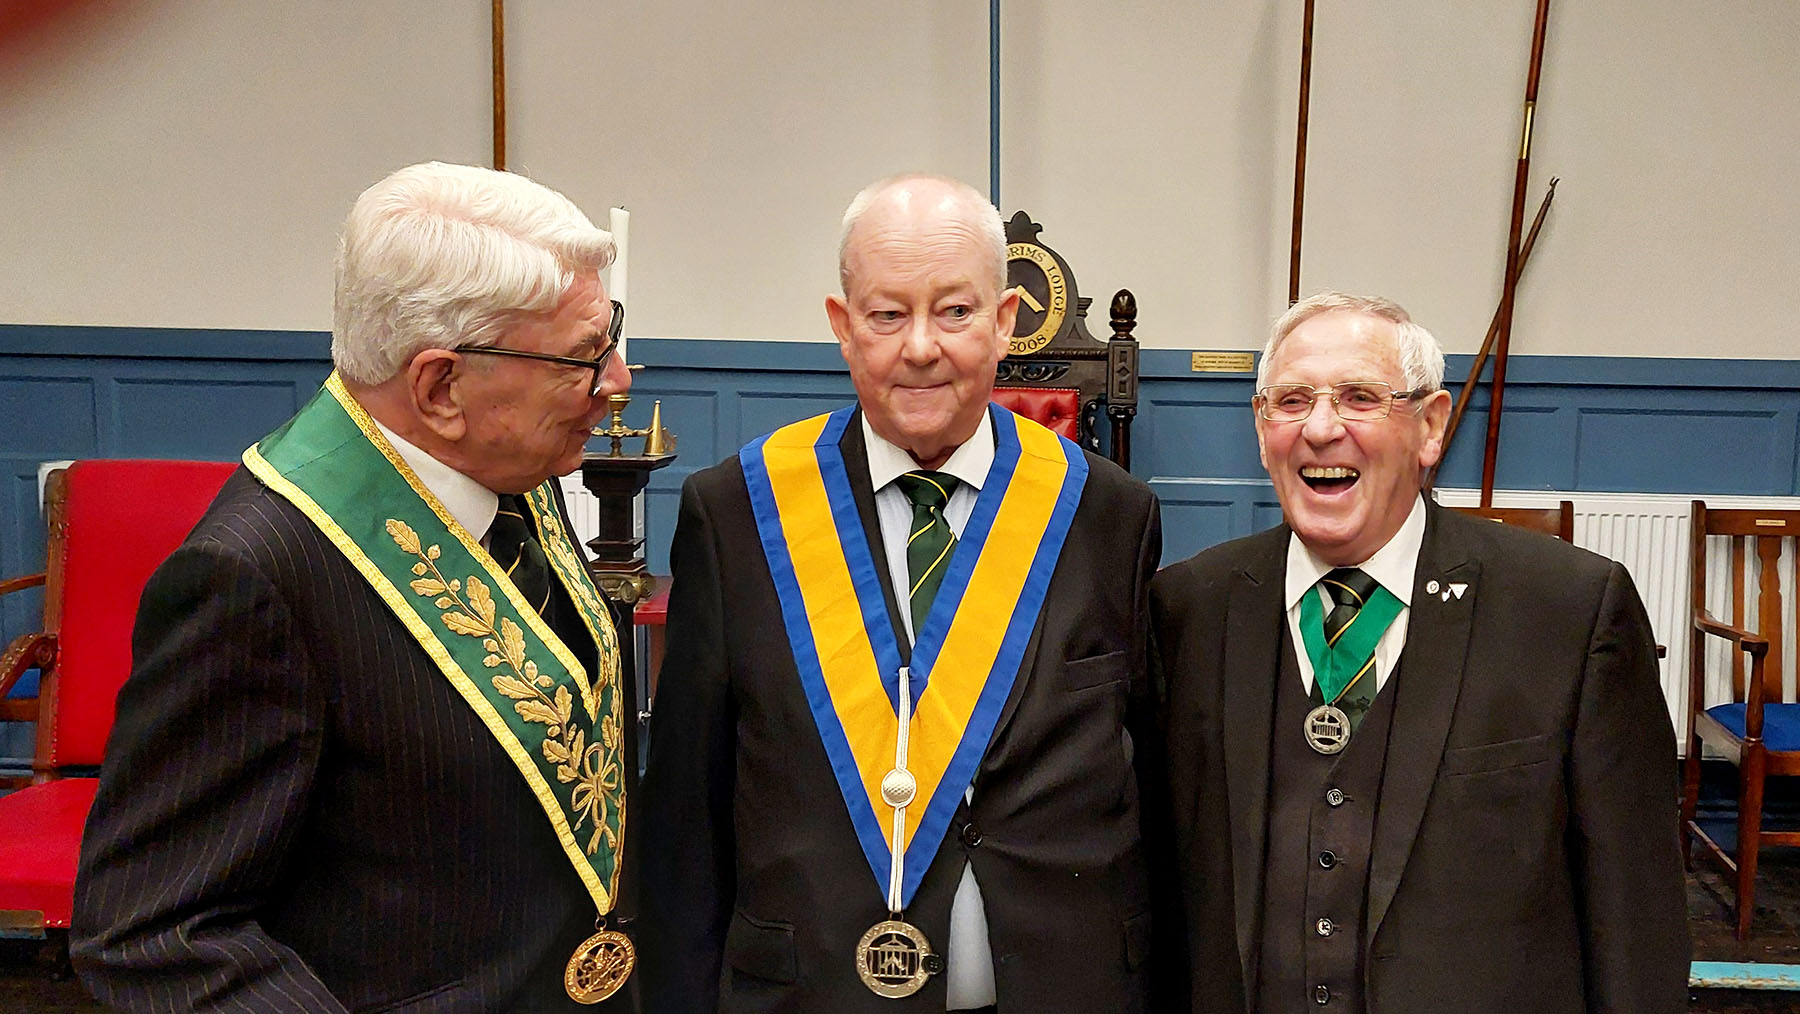 W. Bro Roland Wade enjoys a joke with the Installing Master W.Bro Ron Jakes whilst the newly installed  Master W. Bro Nigel Cash wonders what is going on